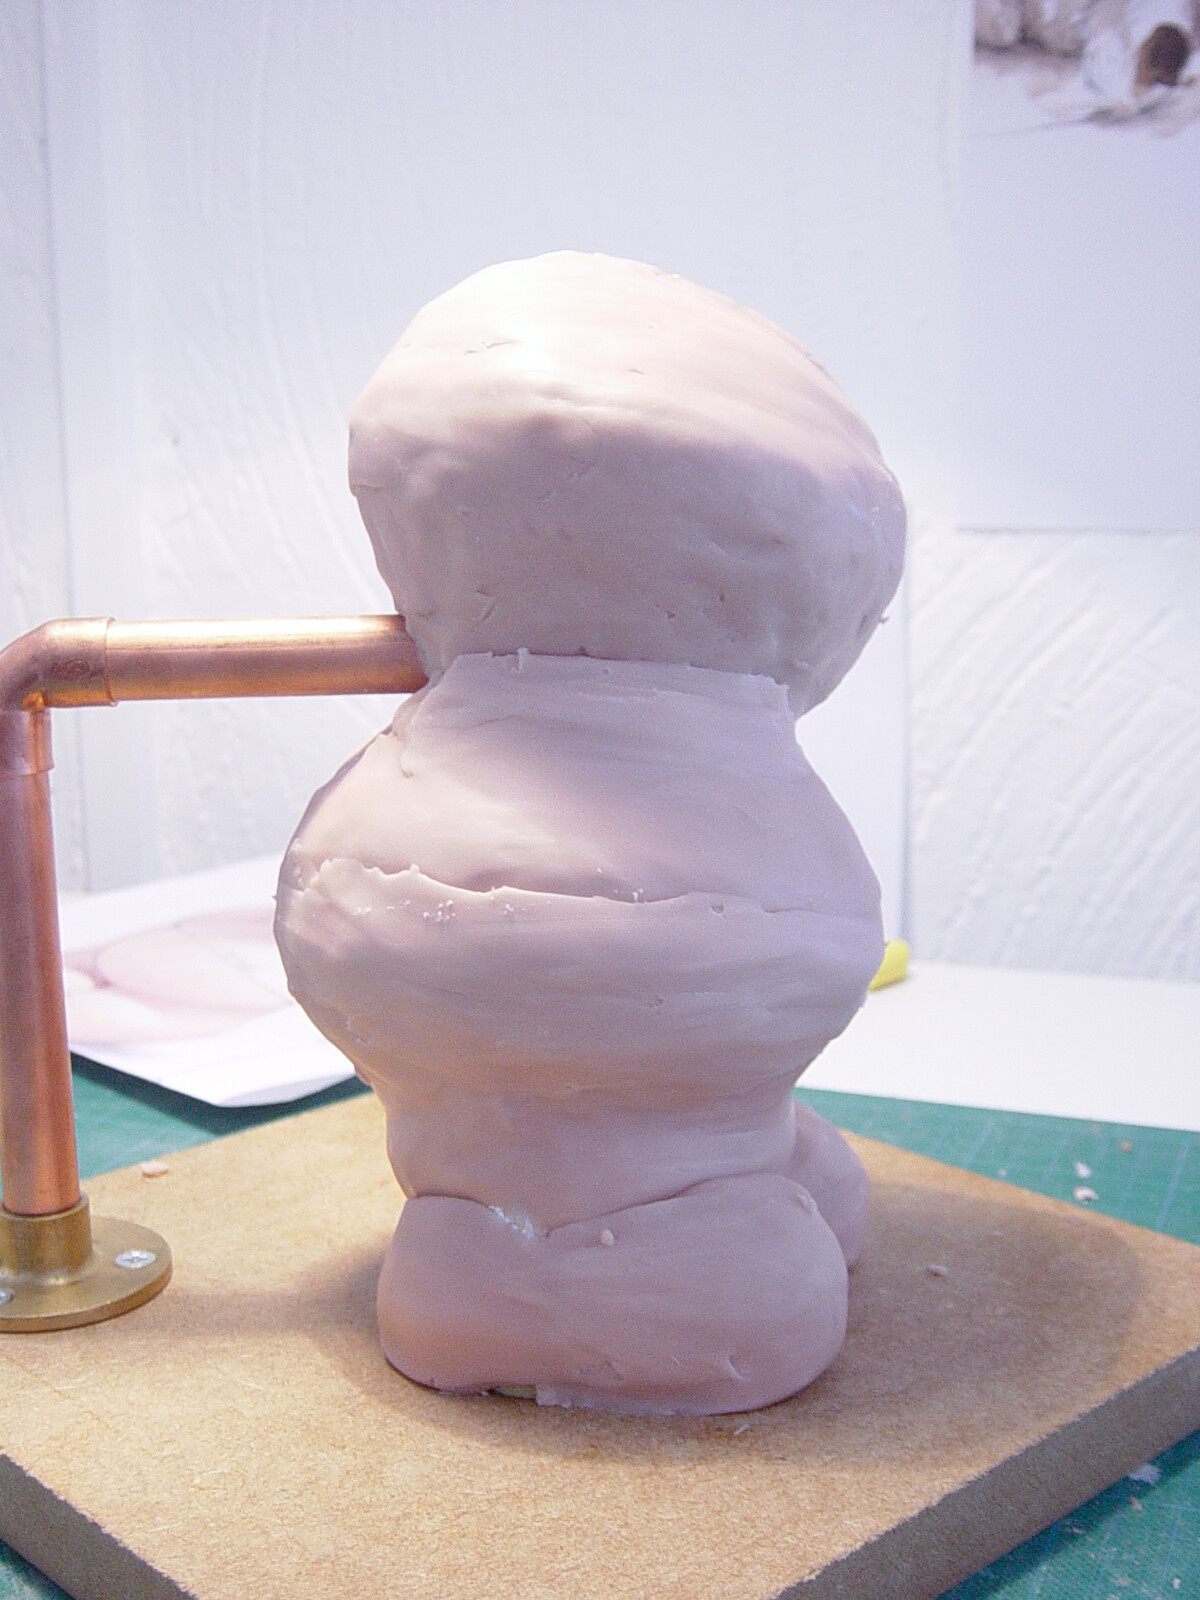 Here I am applying the first layer of sculpey.